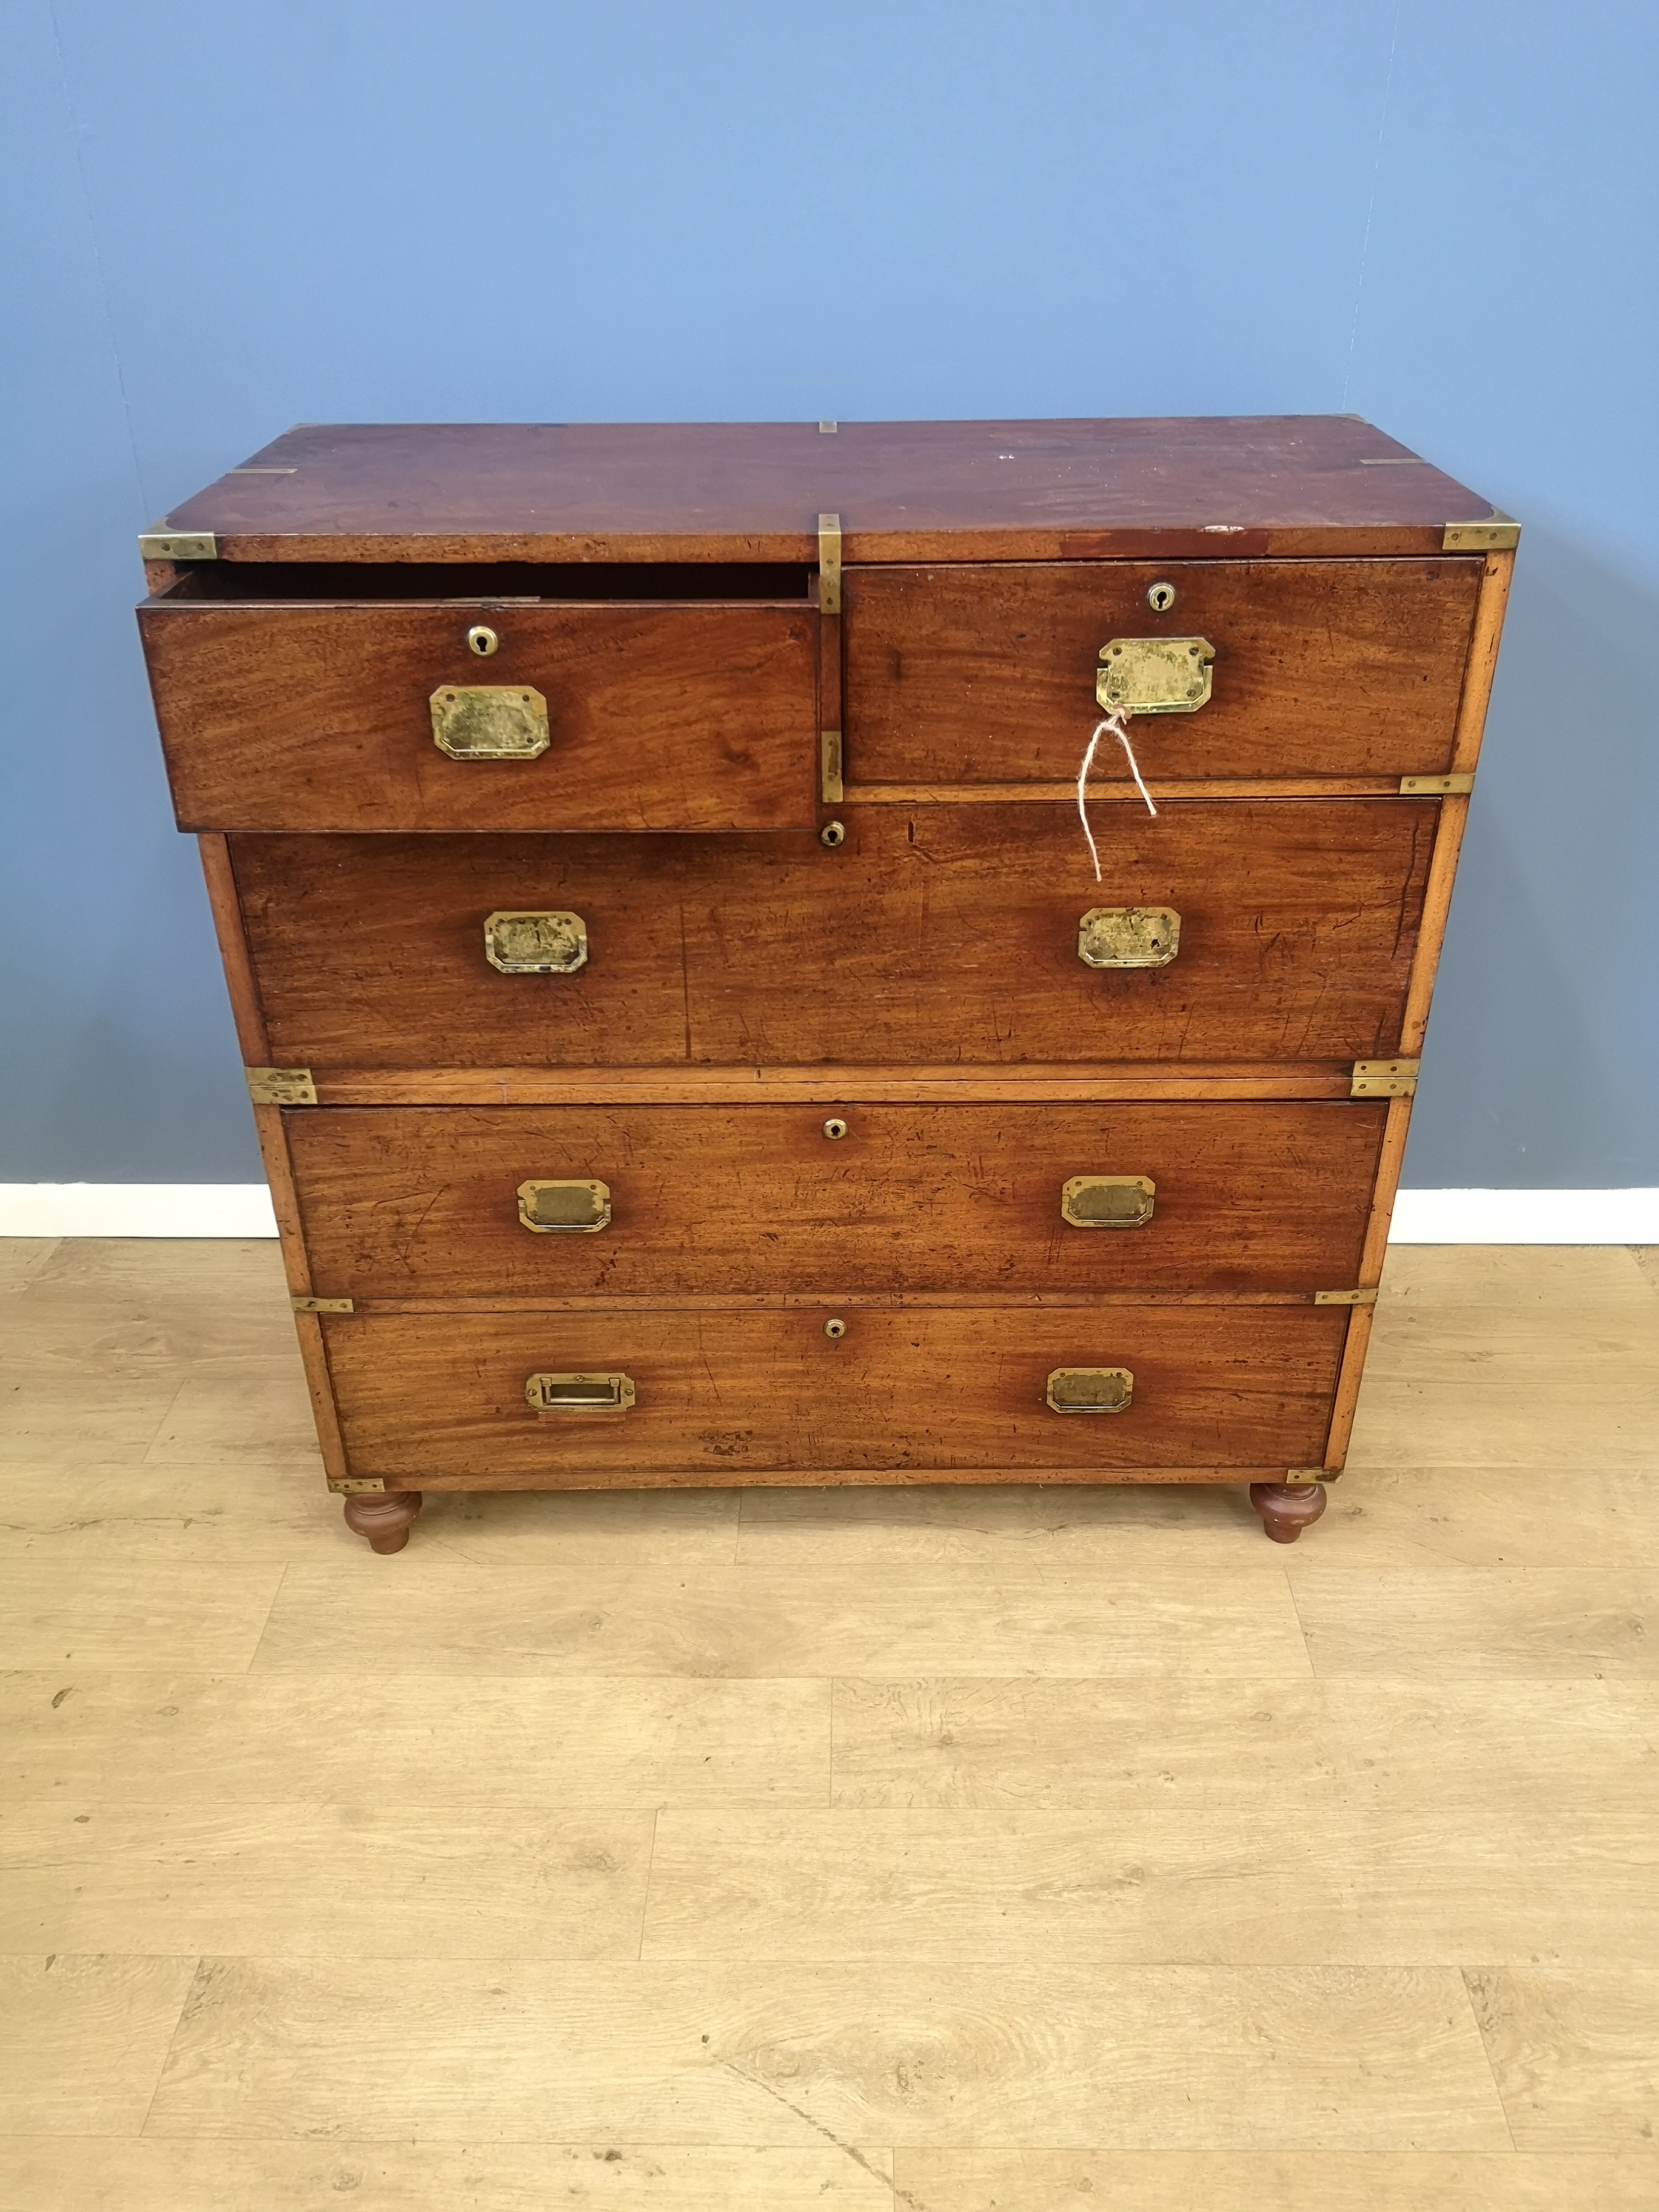 Victorian mahogany campaign chest of drawers - Image 6 of 6